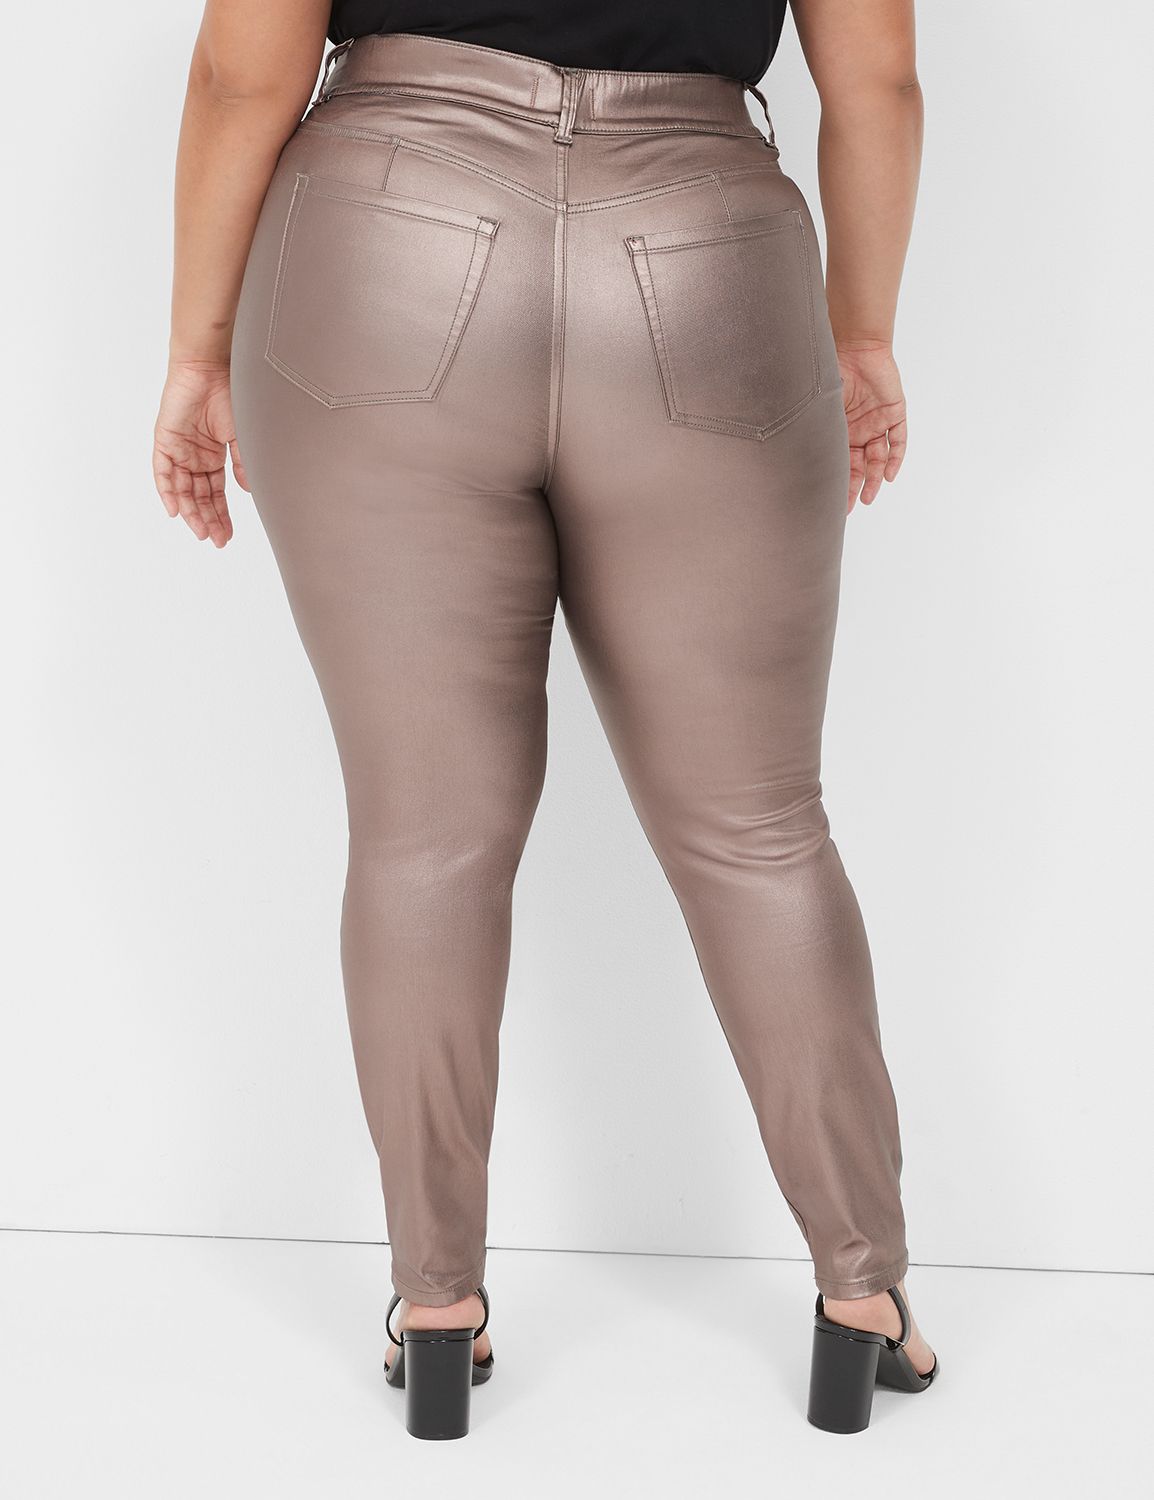 Autograph Pull On Knitwear Jeggings - Womens - Plus Size Curvy